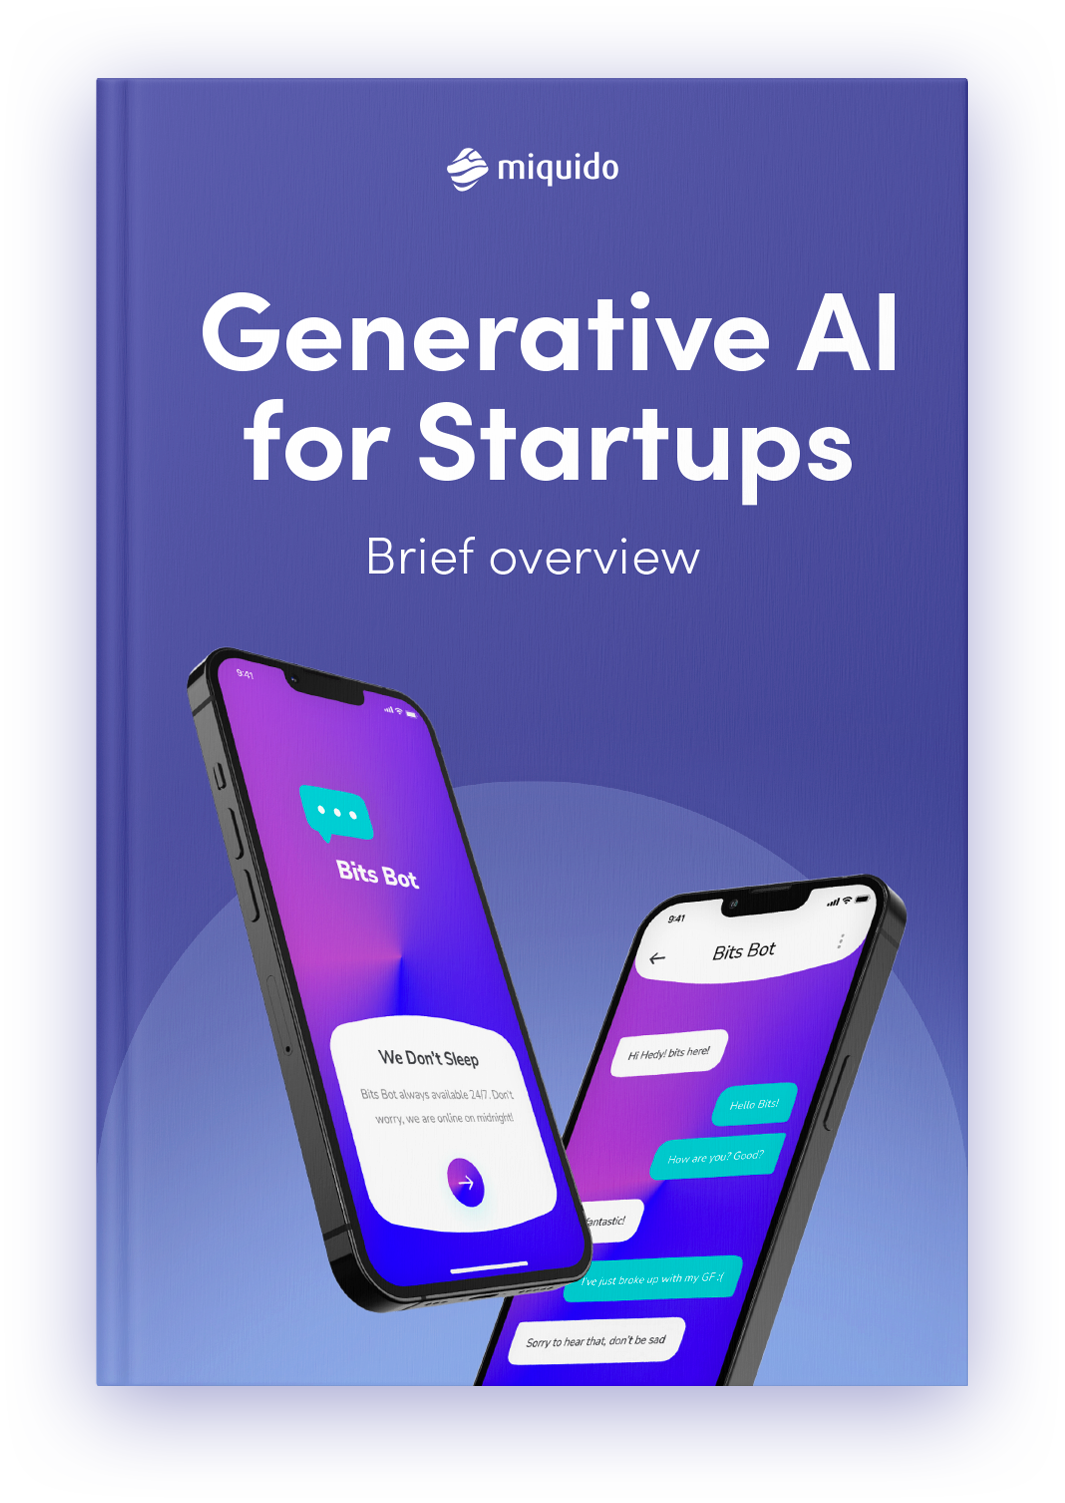 Guide to Generative AI for Startups book cover mockup-shadow